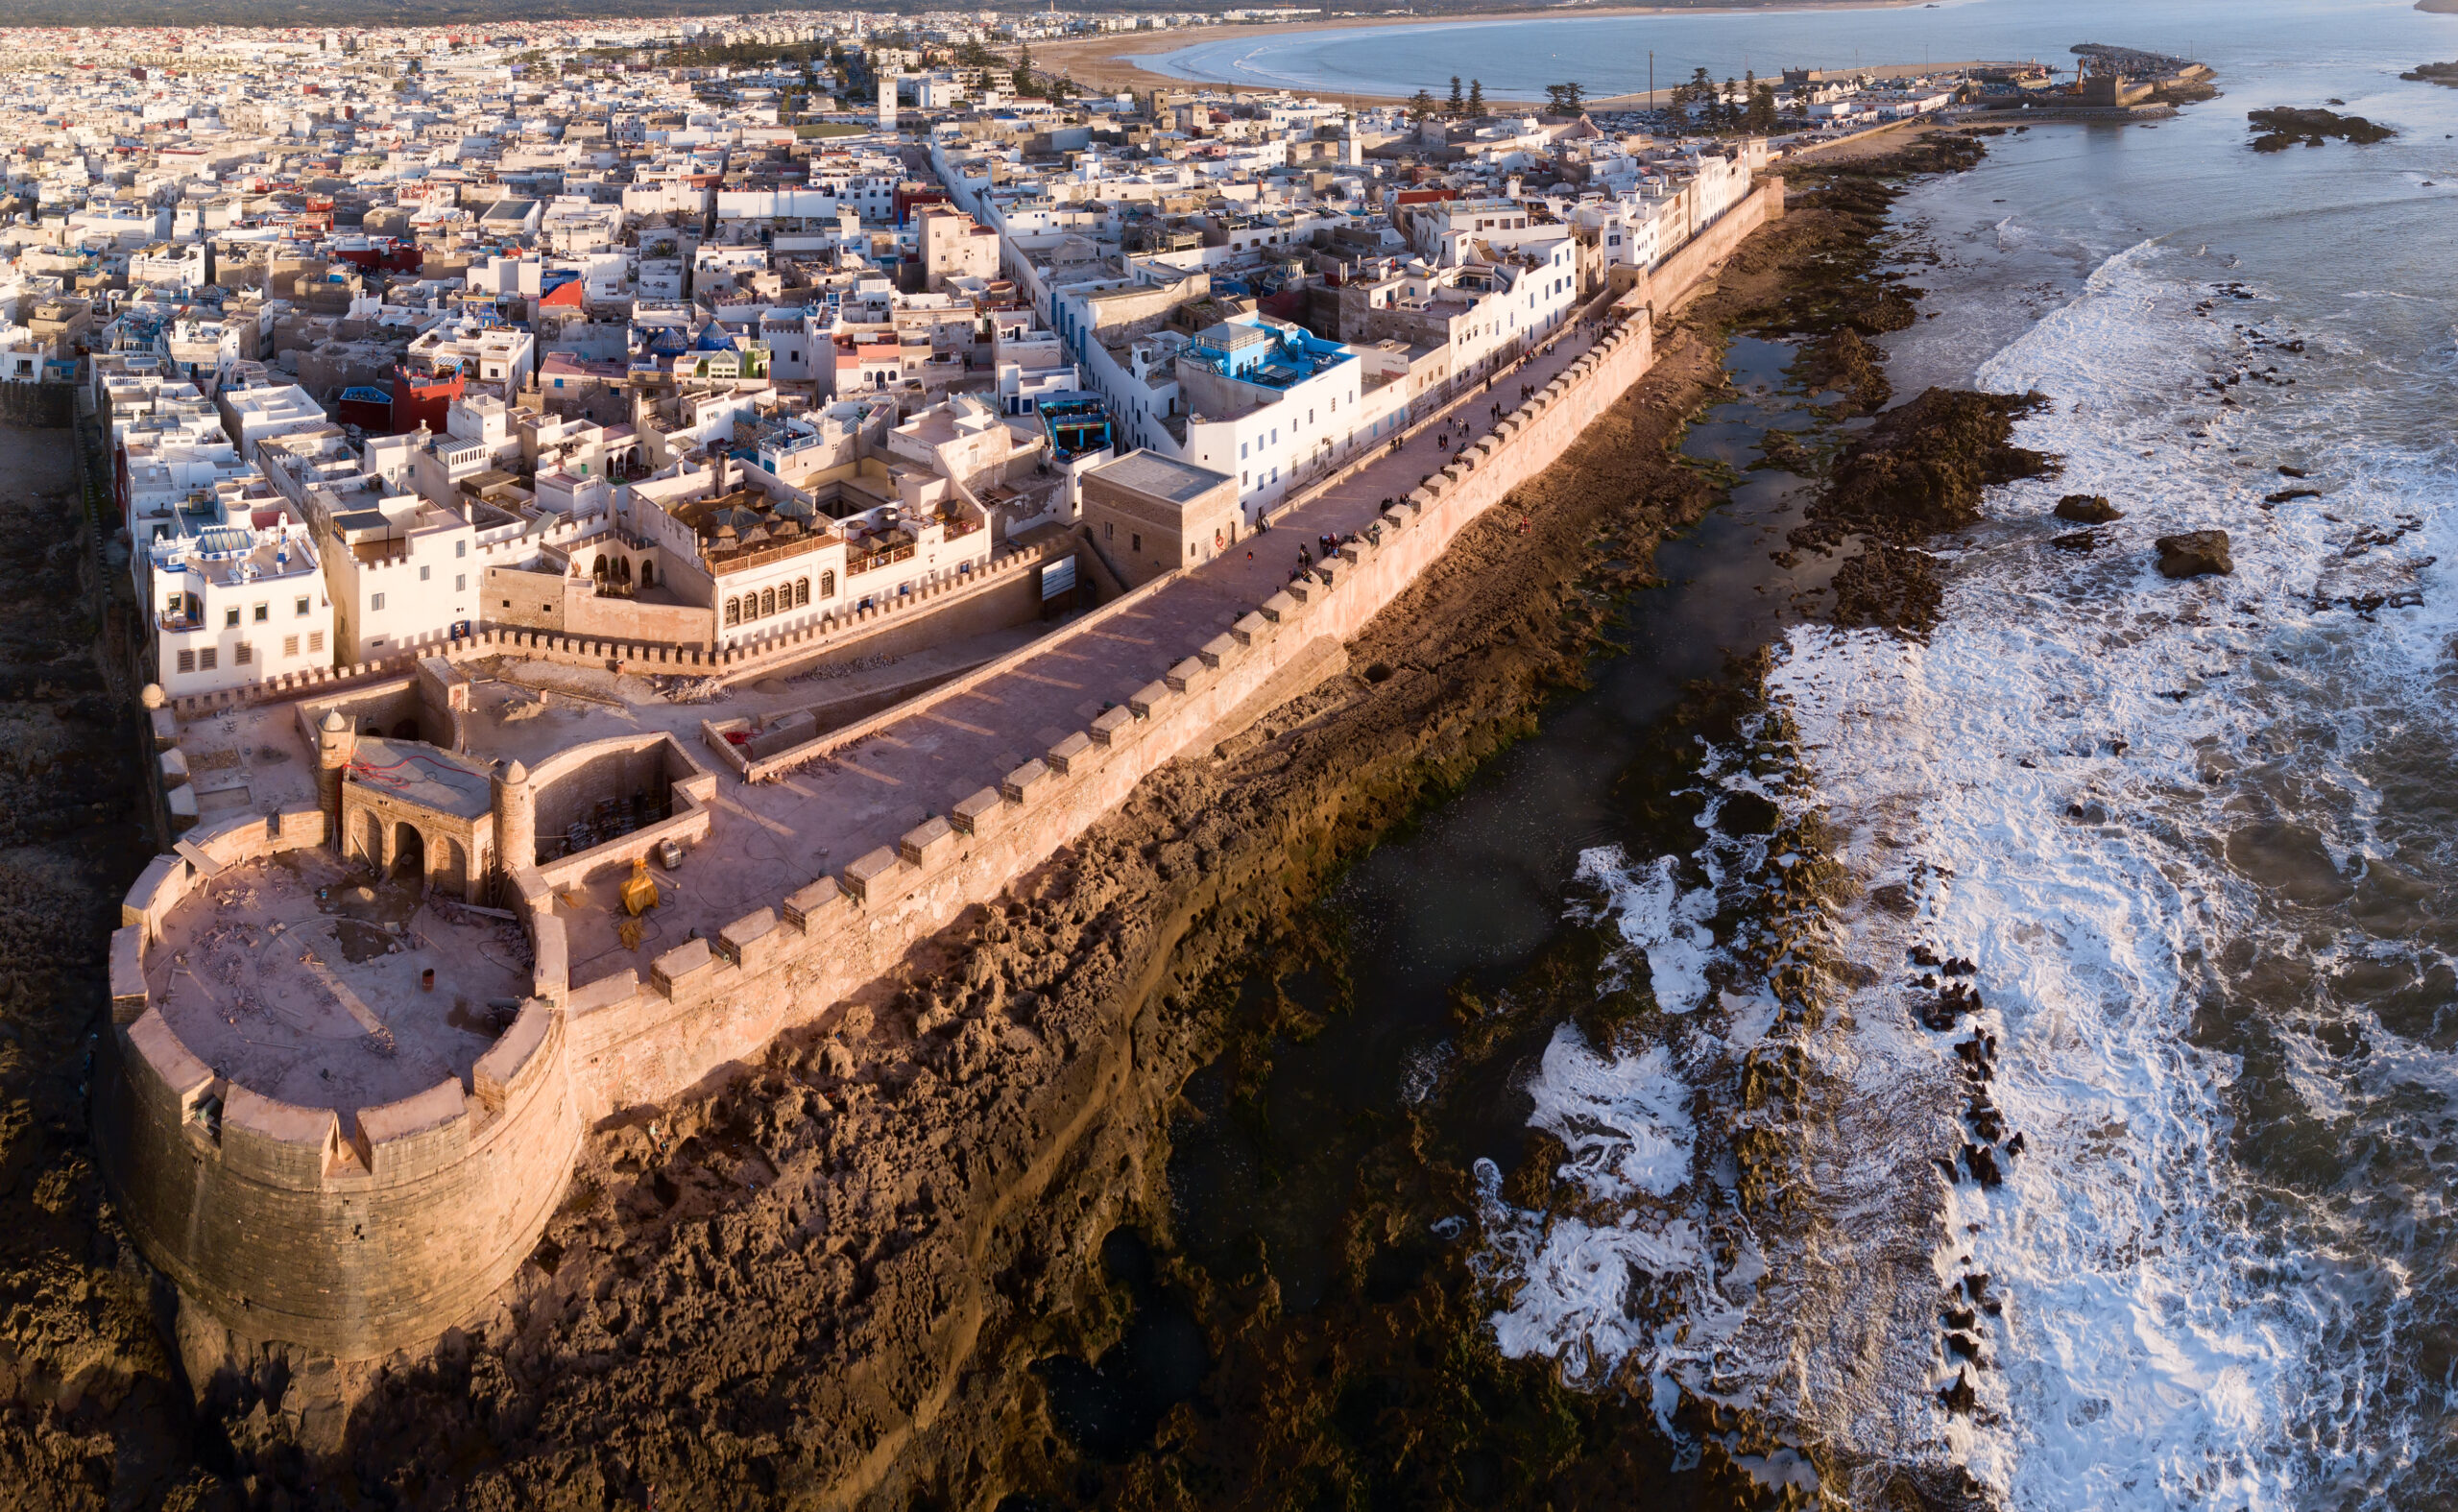 production-services-and-filming-in-marocco-fortified-city-at-the-sea